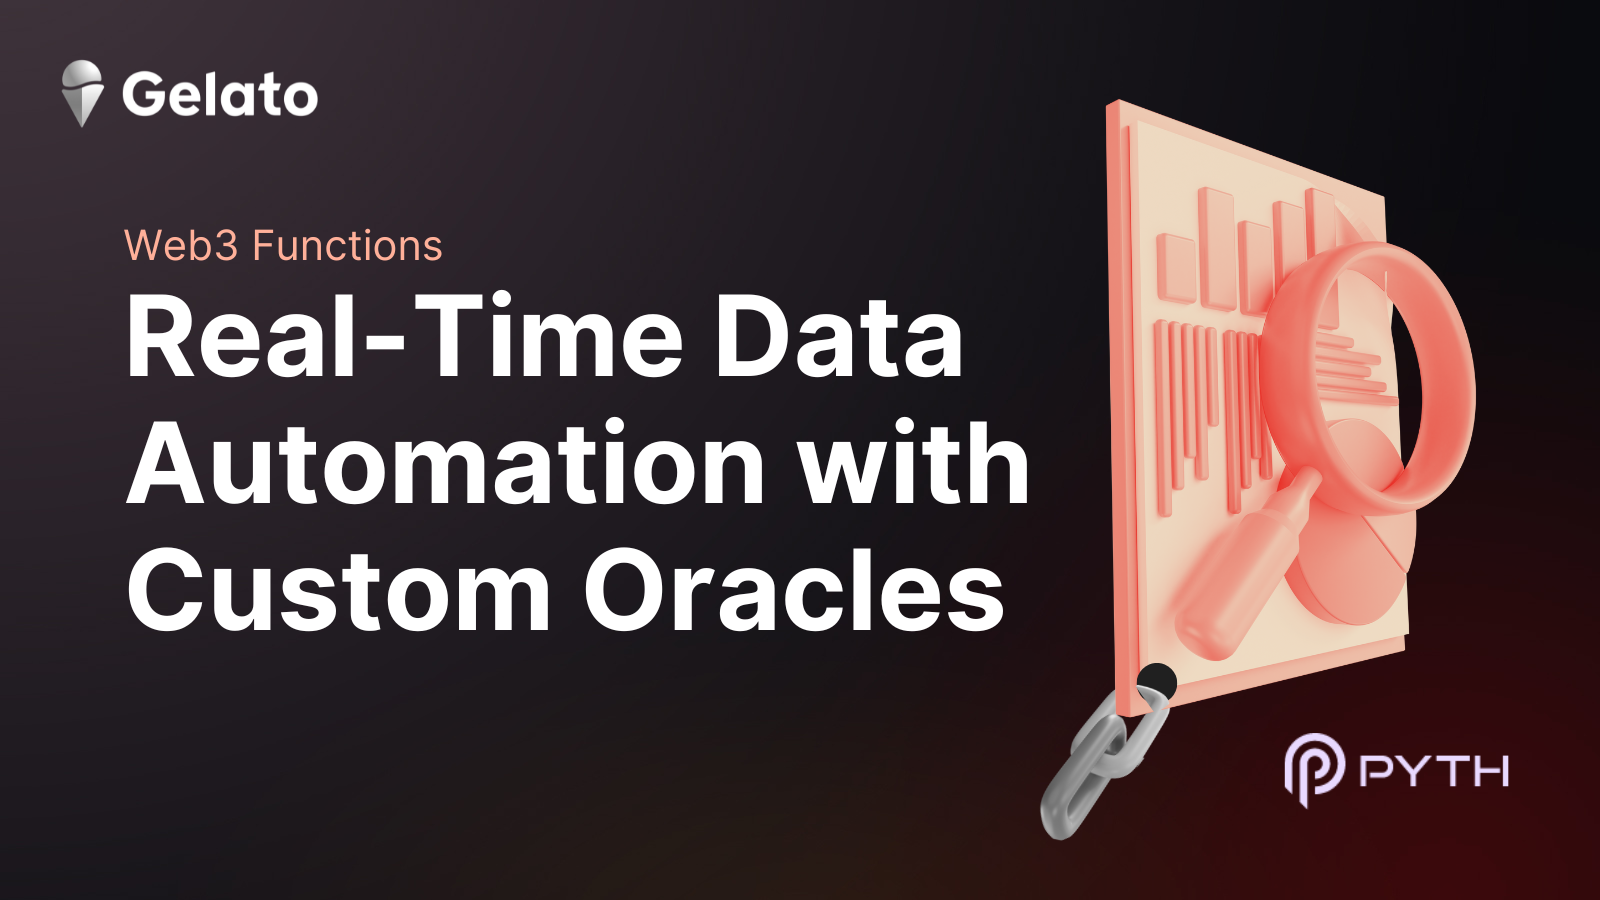 Real-Time Data Automation with Custom Oracles